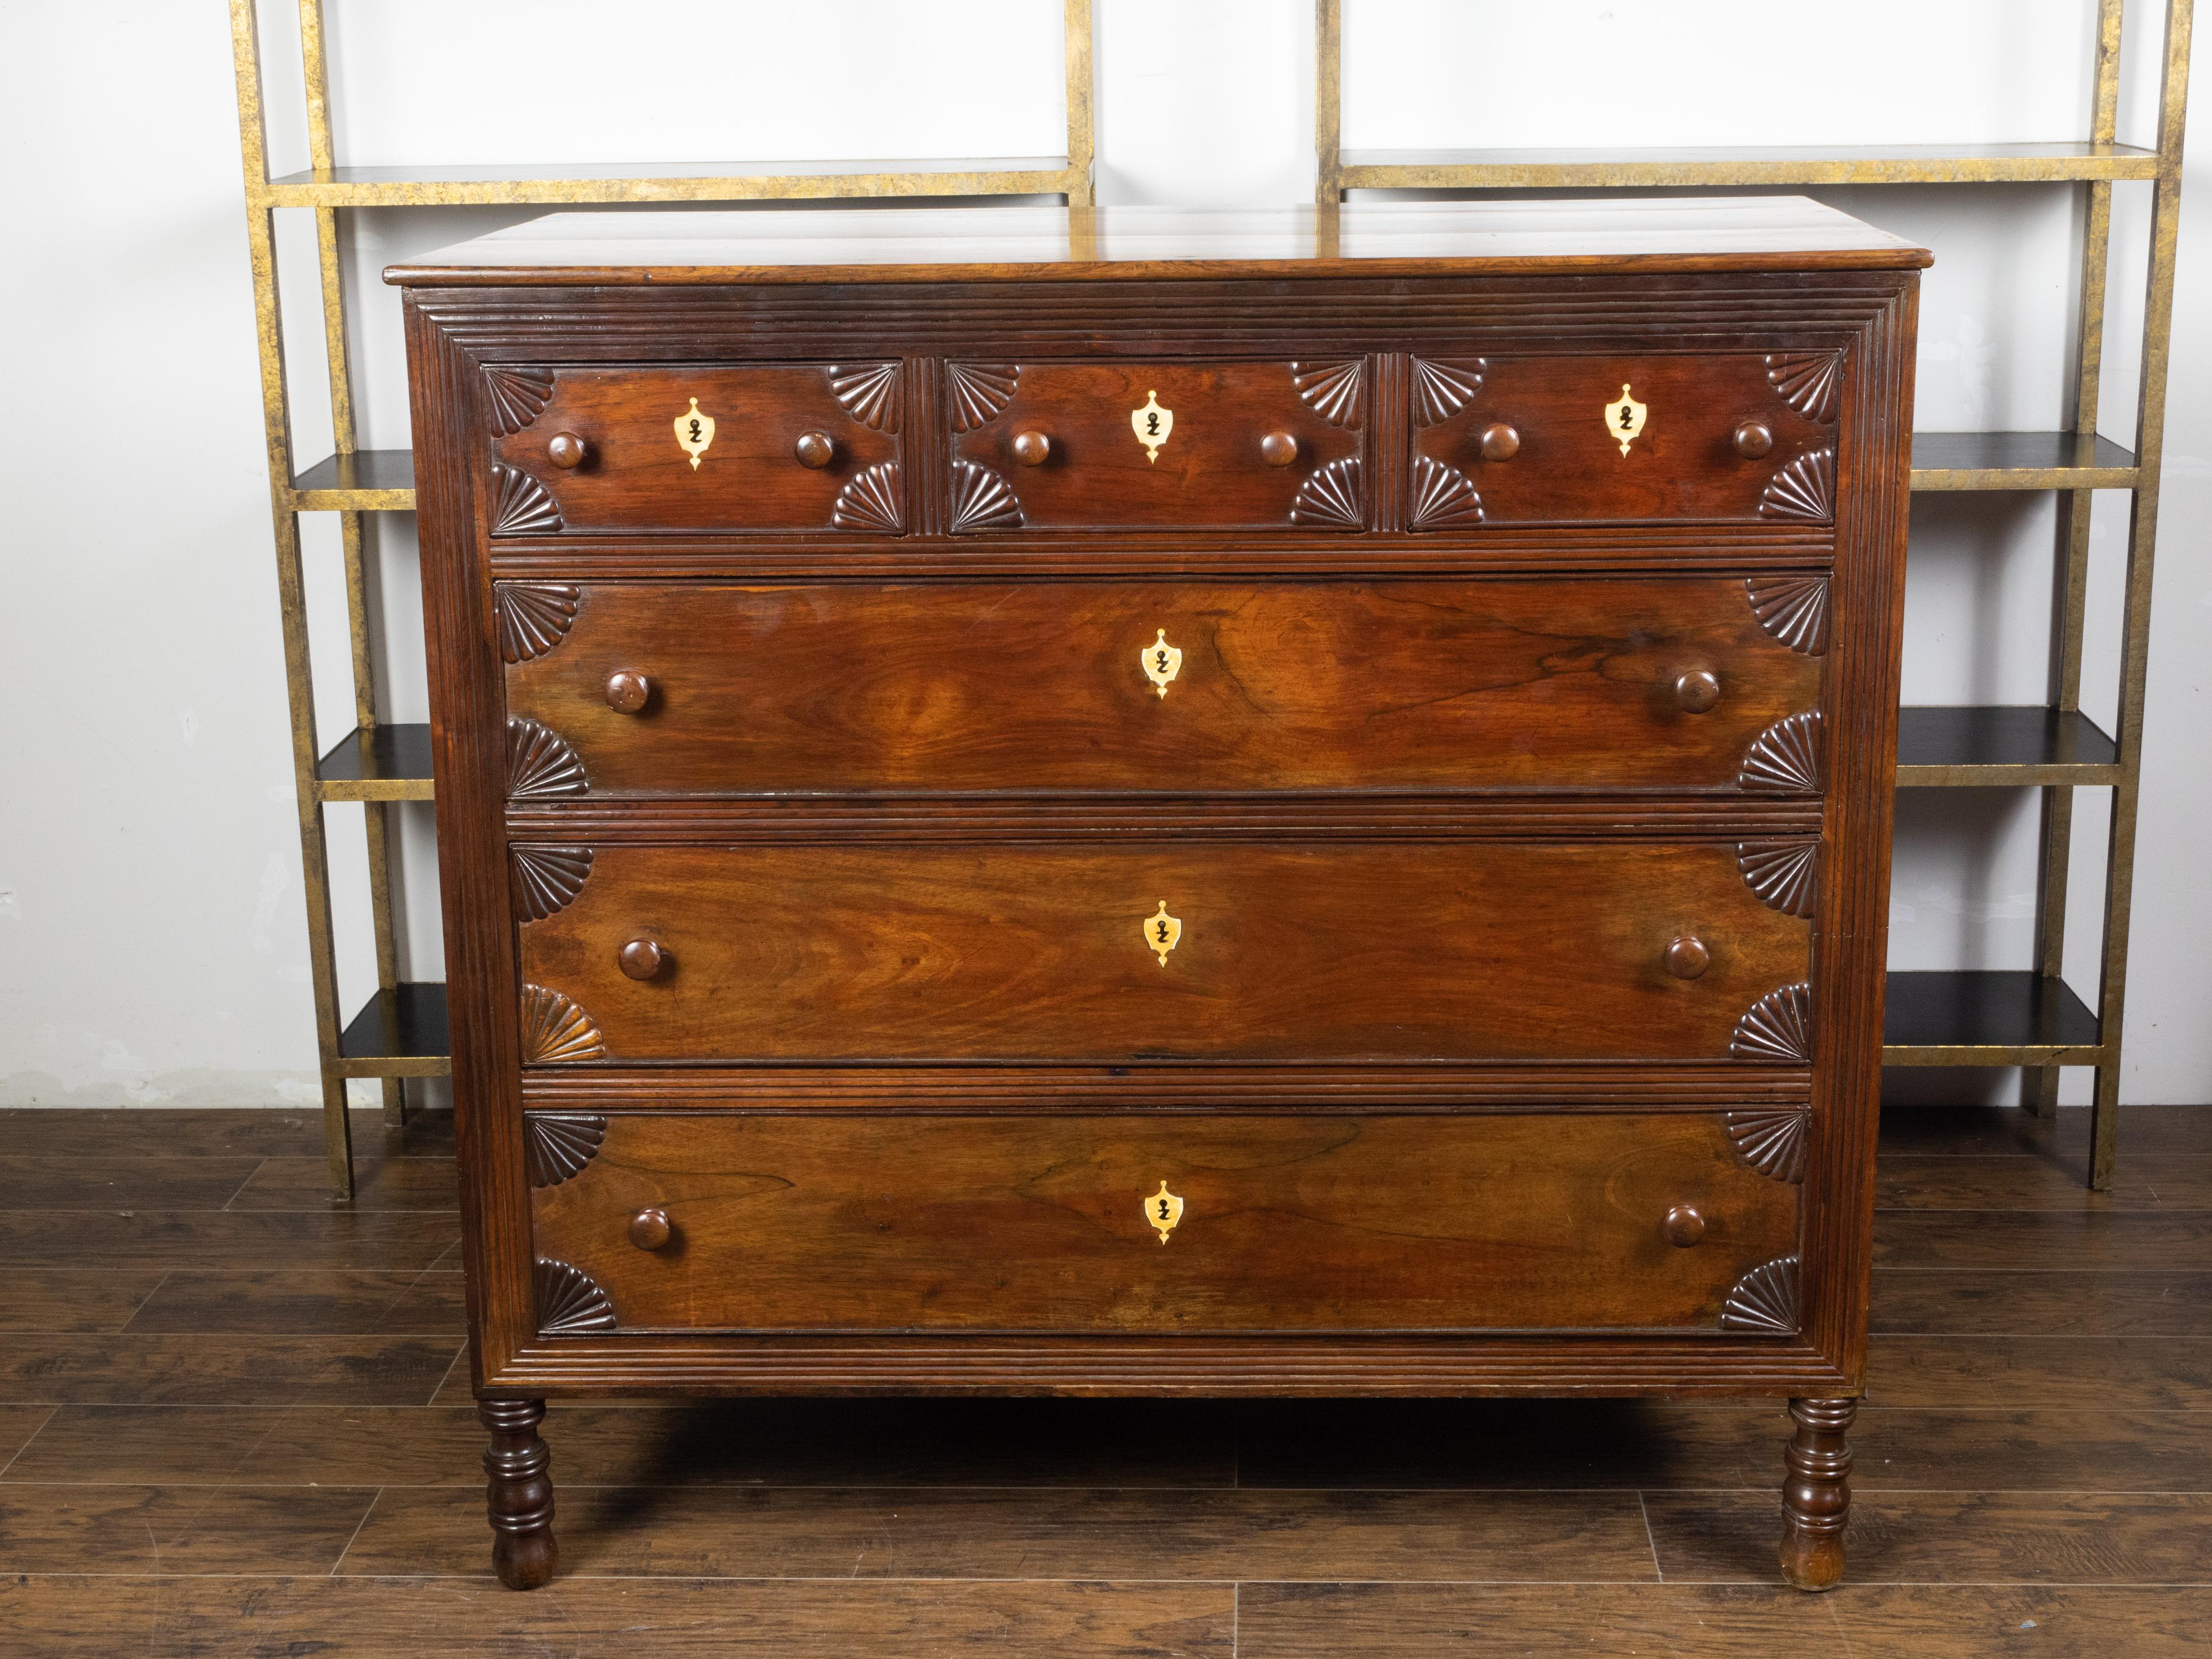 Carved Anglo-Indian 1800s Six-Drawer Chest with Radiating Fan Motifs and Bone Inlay